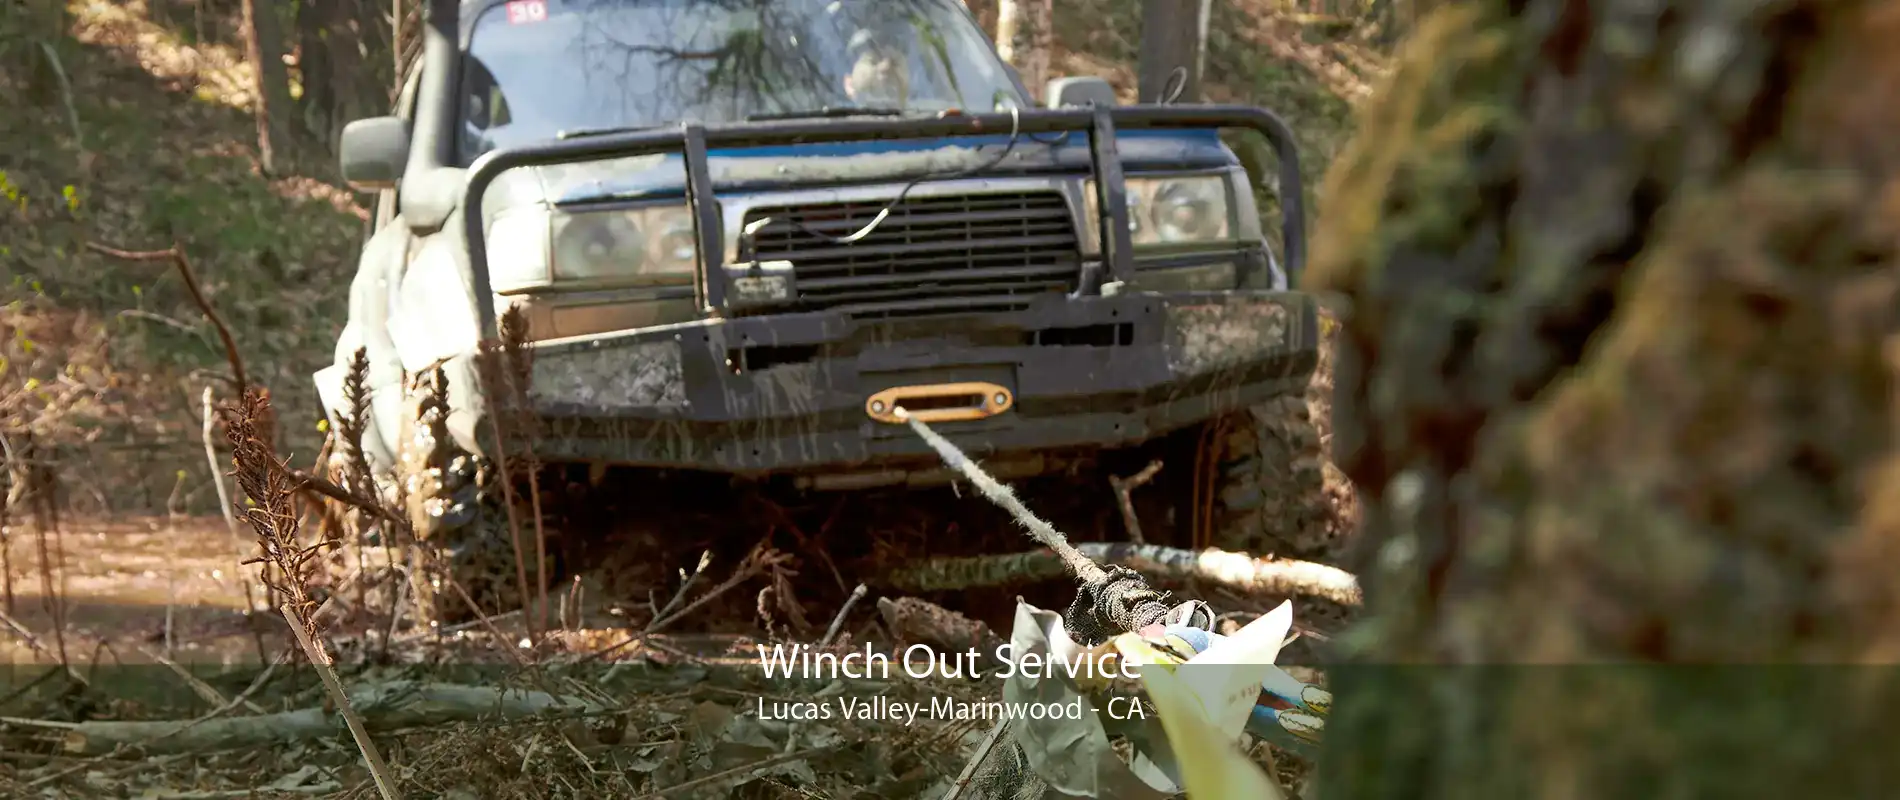 Winch Out Service Lucas Valley-Marinwood - CA